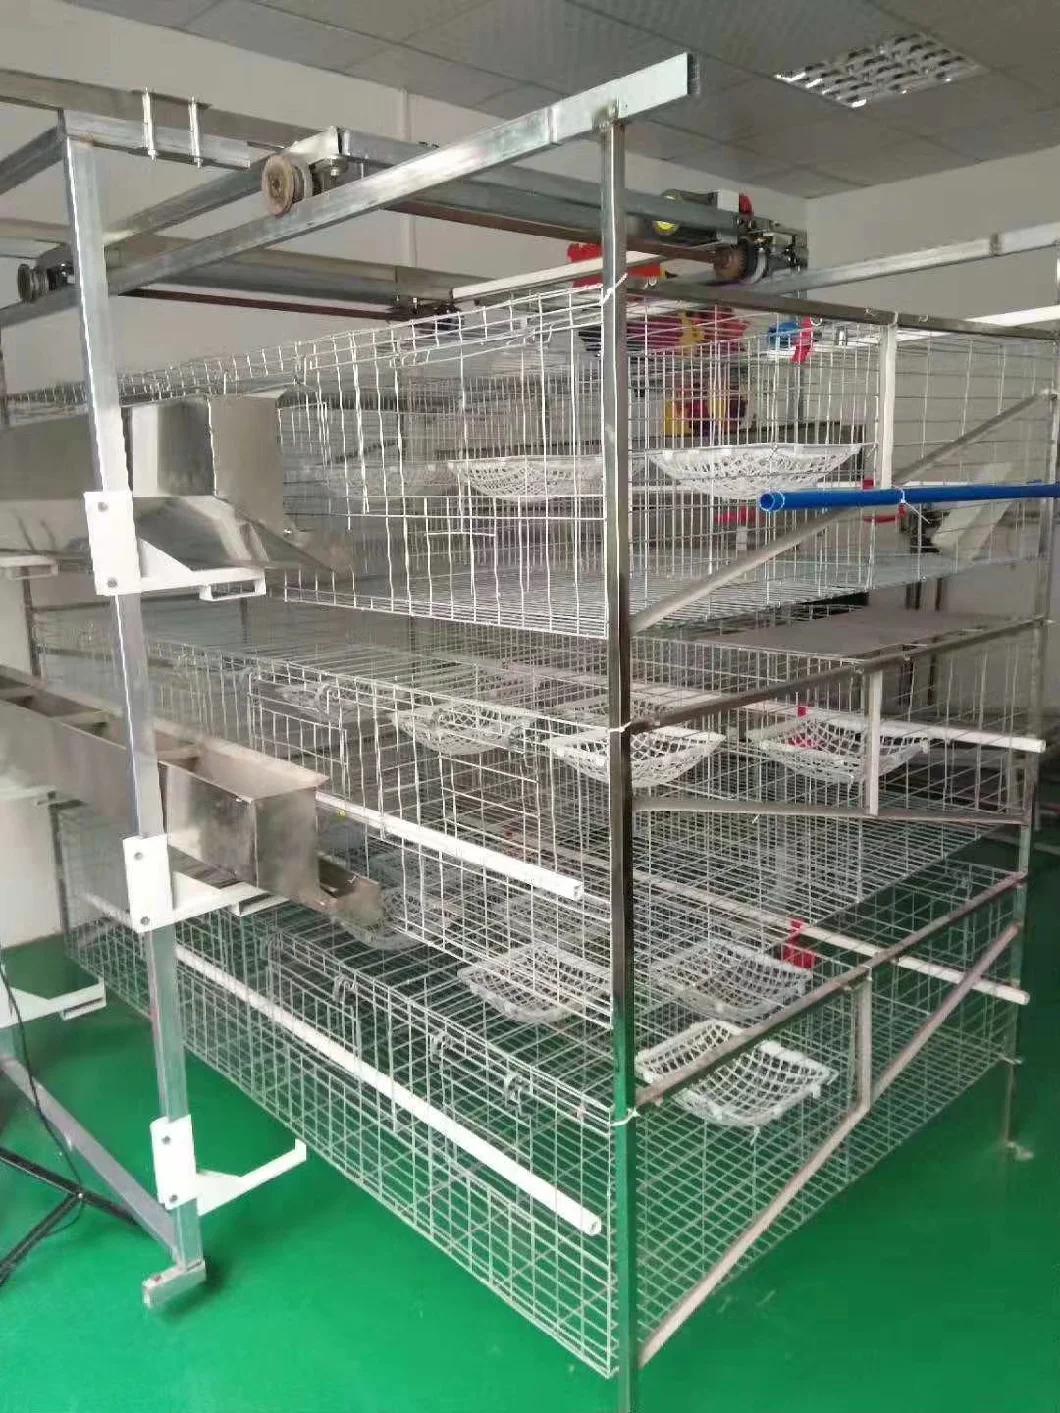 High-End Quality Pigeon Equipment and Pigeon Houses